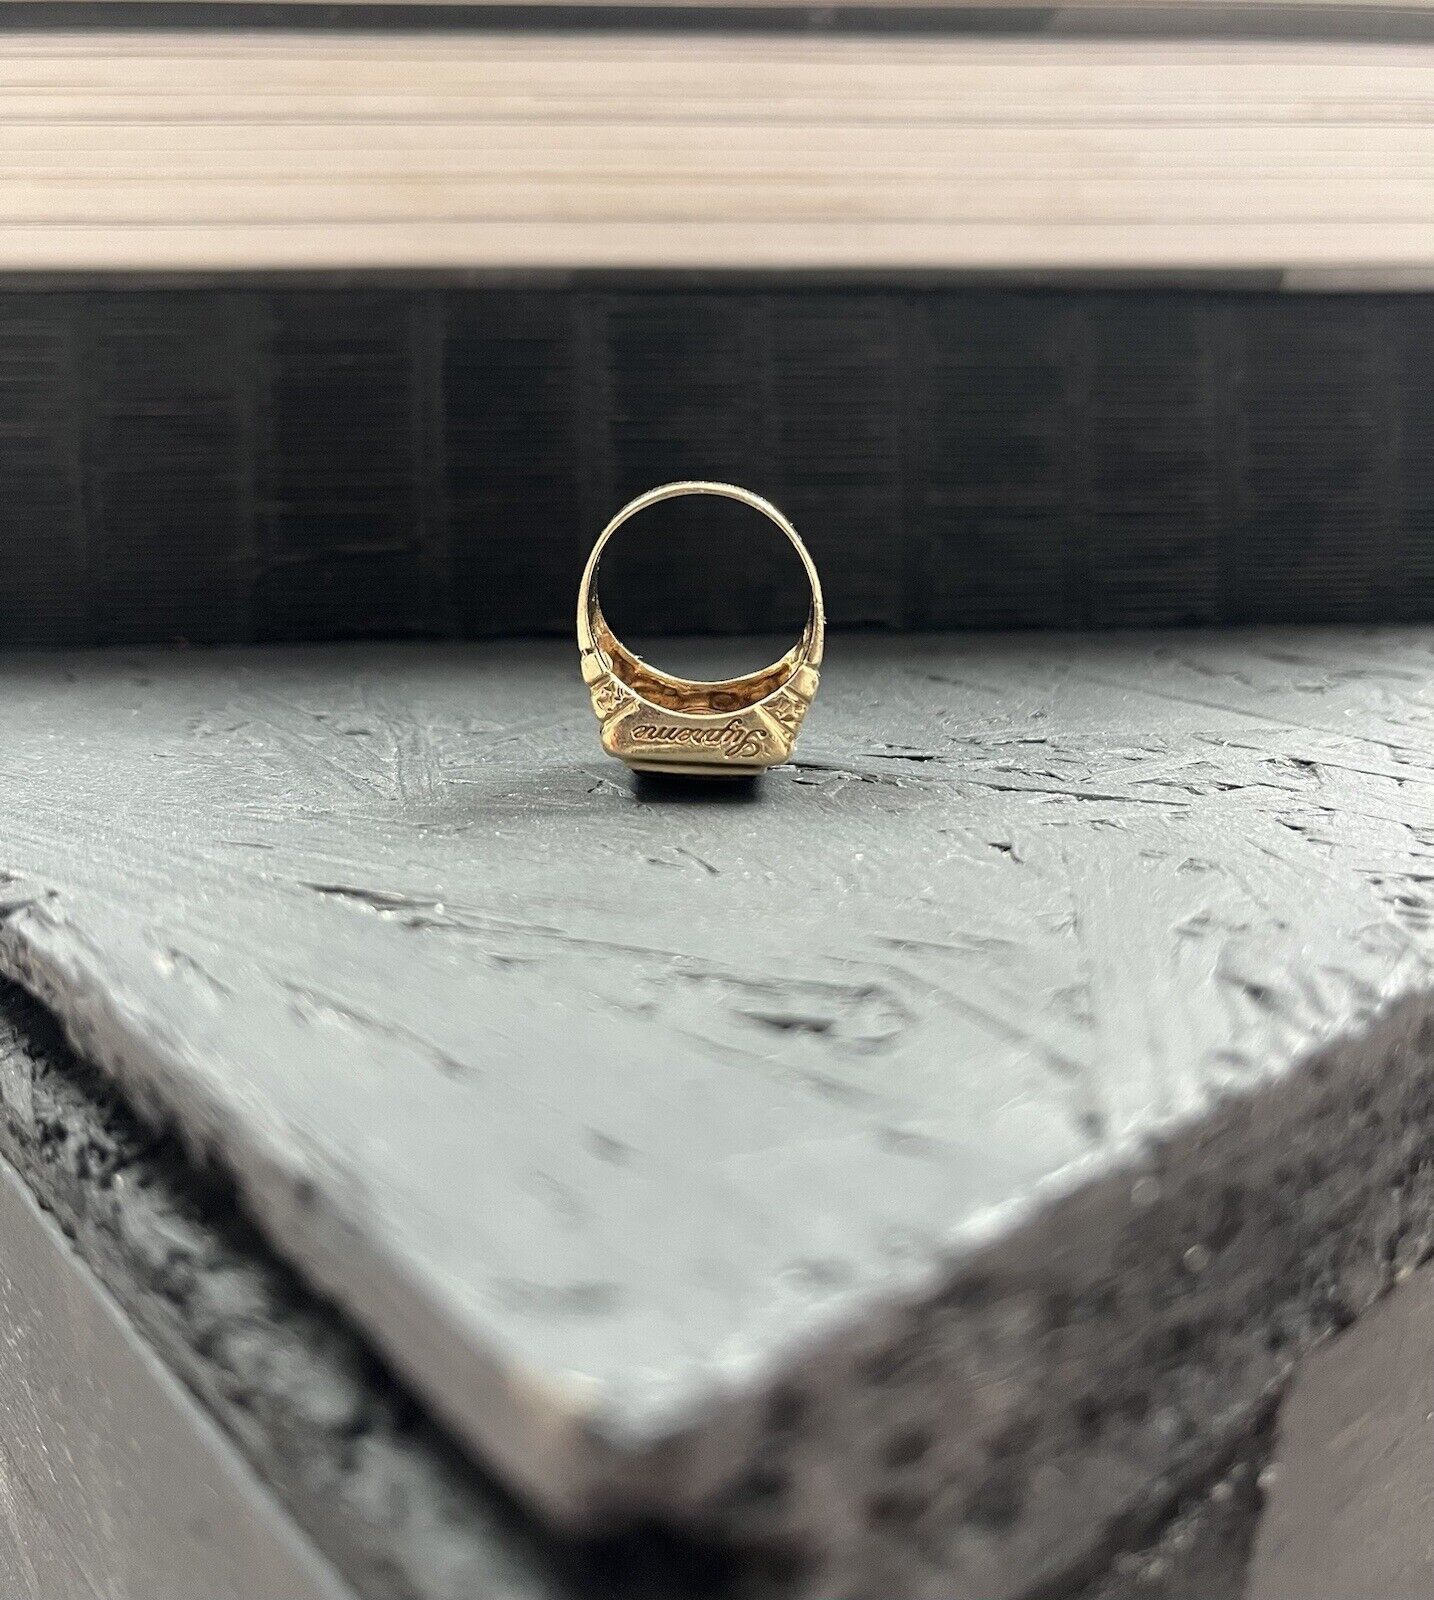 Supreme S/S14 Onyx Pinky Ring | Grailed